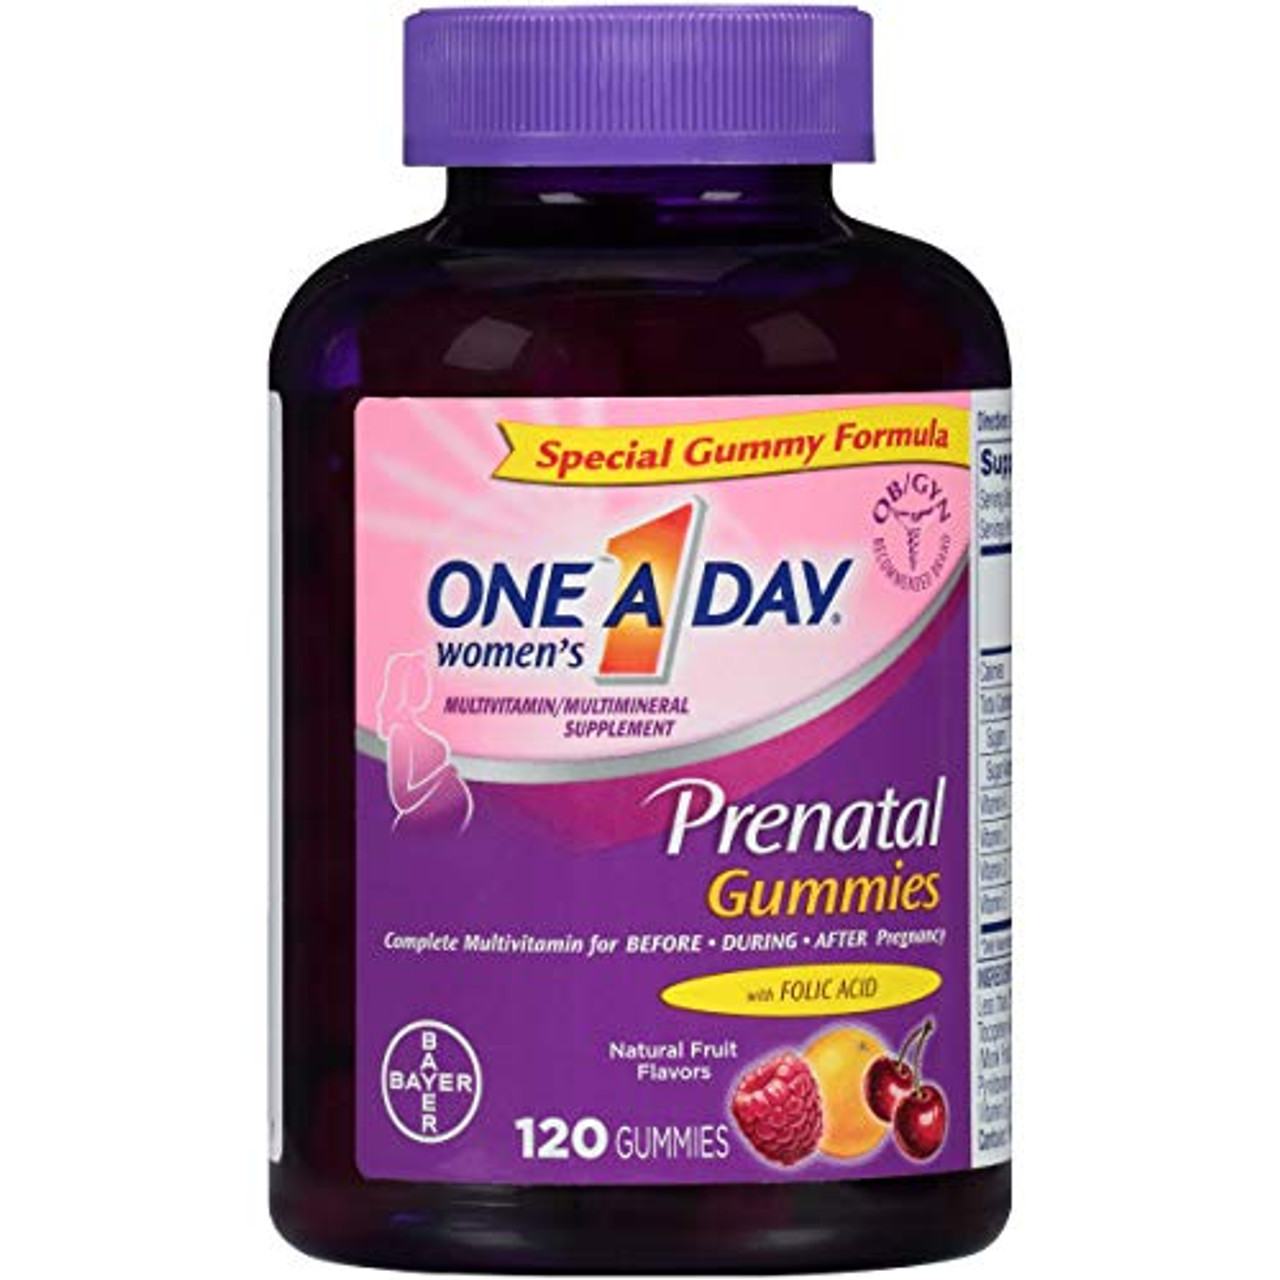 One A Day Women S Prenatal Multivitamin Gummies Supplement For Before And During Pregnancy Including Vitamins A C D E B6 B12 And Folic Acid 1 Count